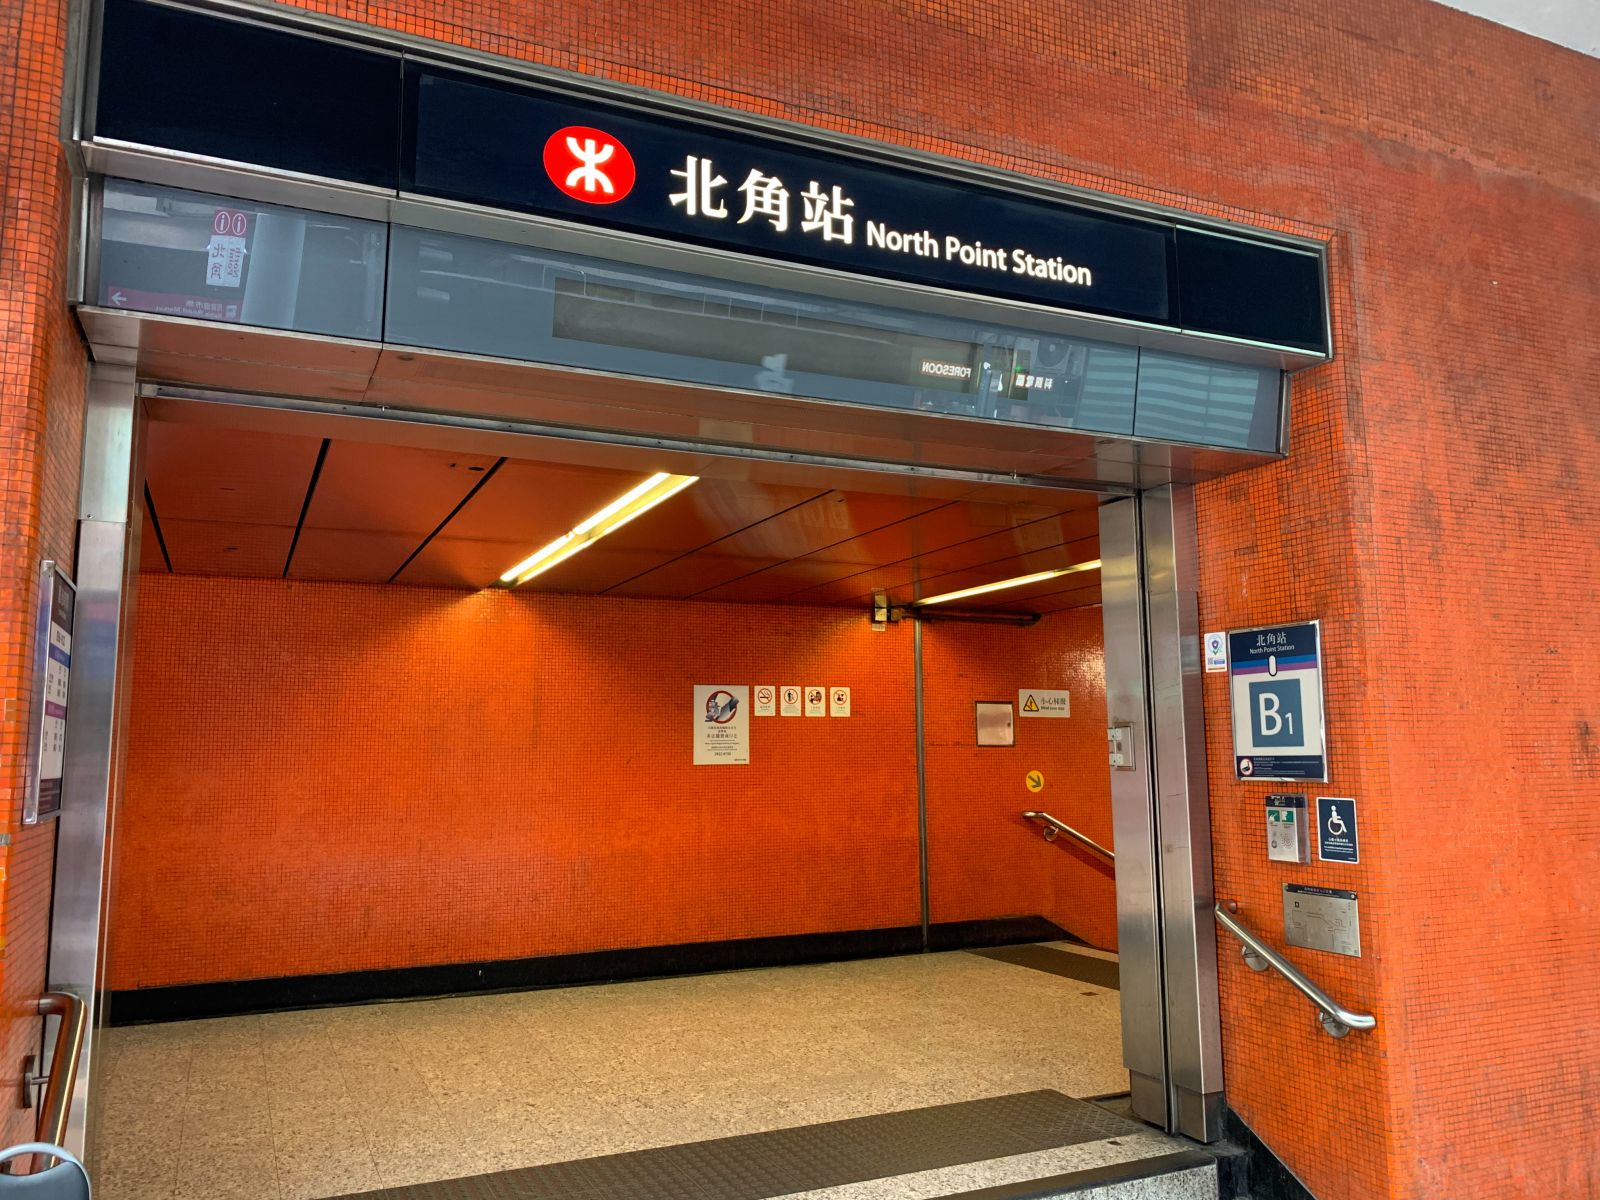 North Point Station Exit B1